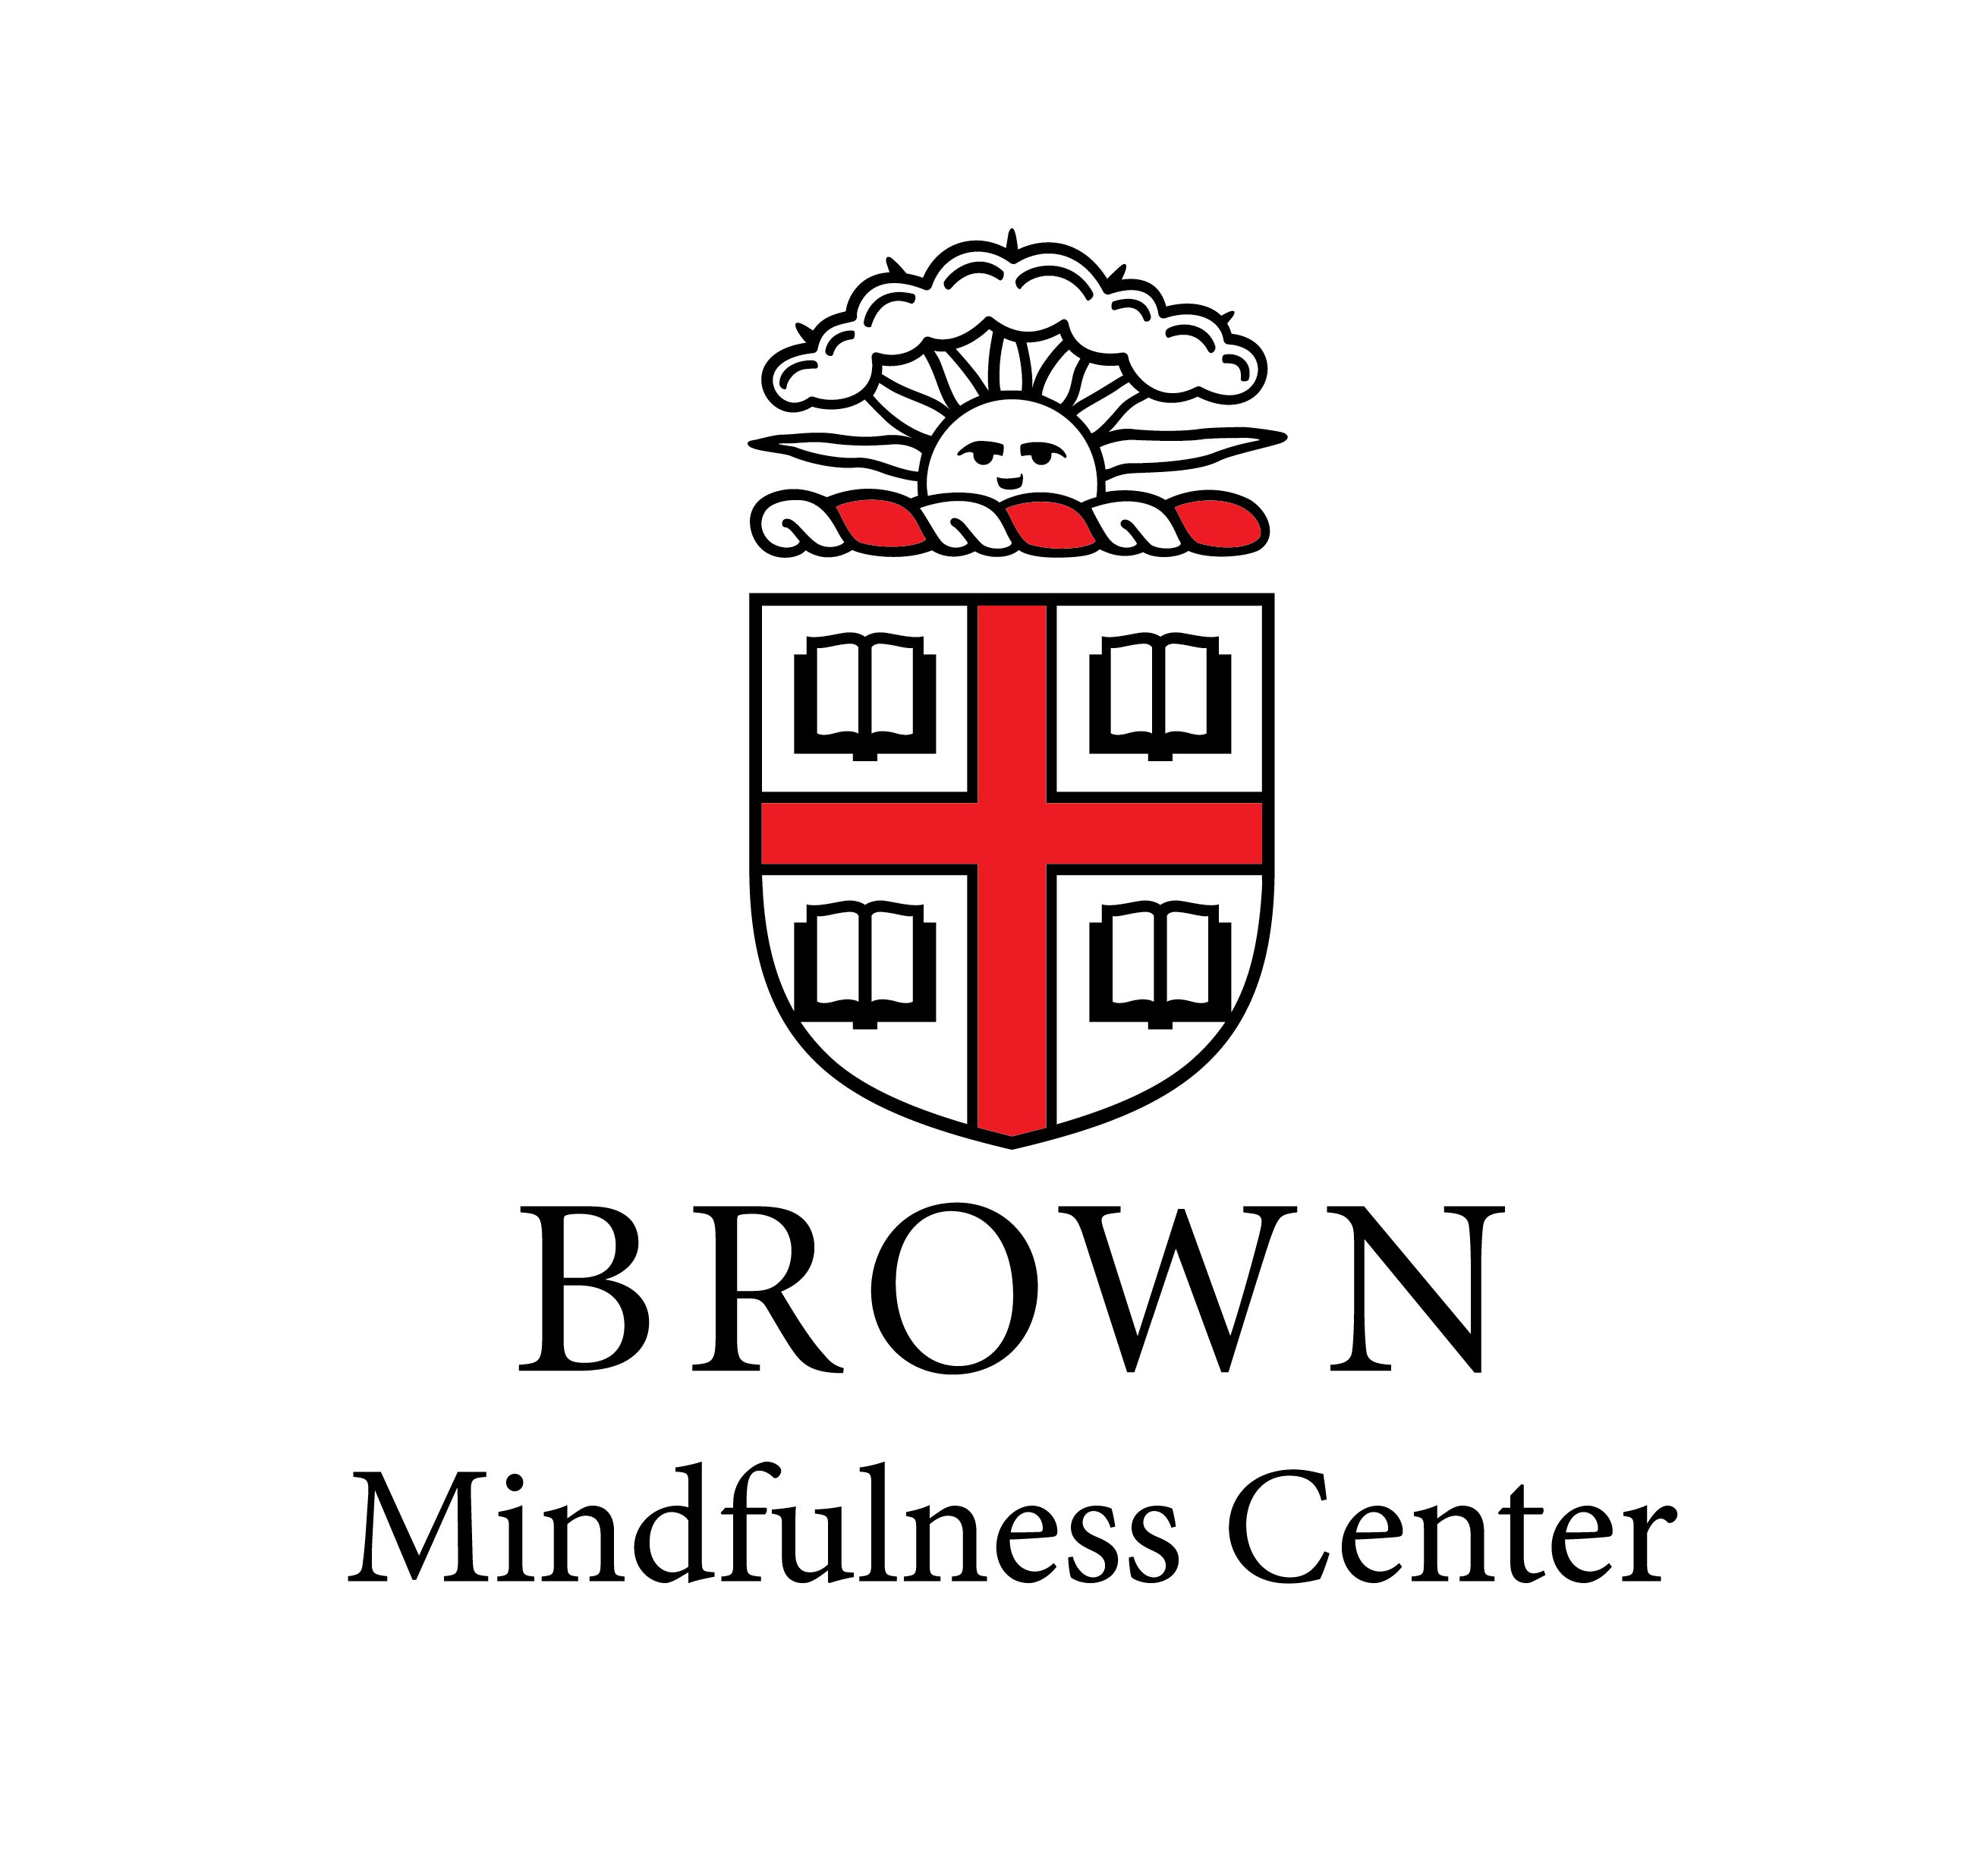 Mindfulness Center at Brown University: Mindfulness Research, Education and Training